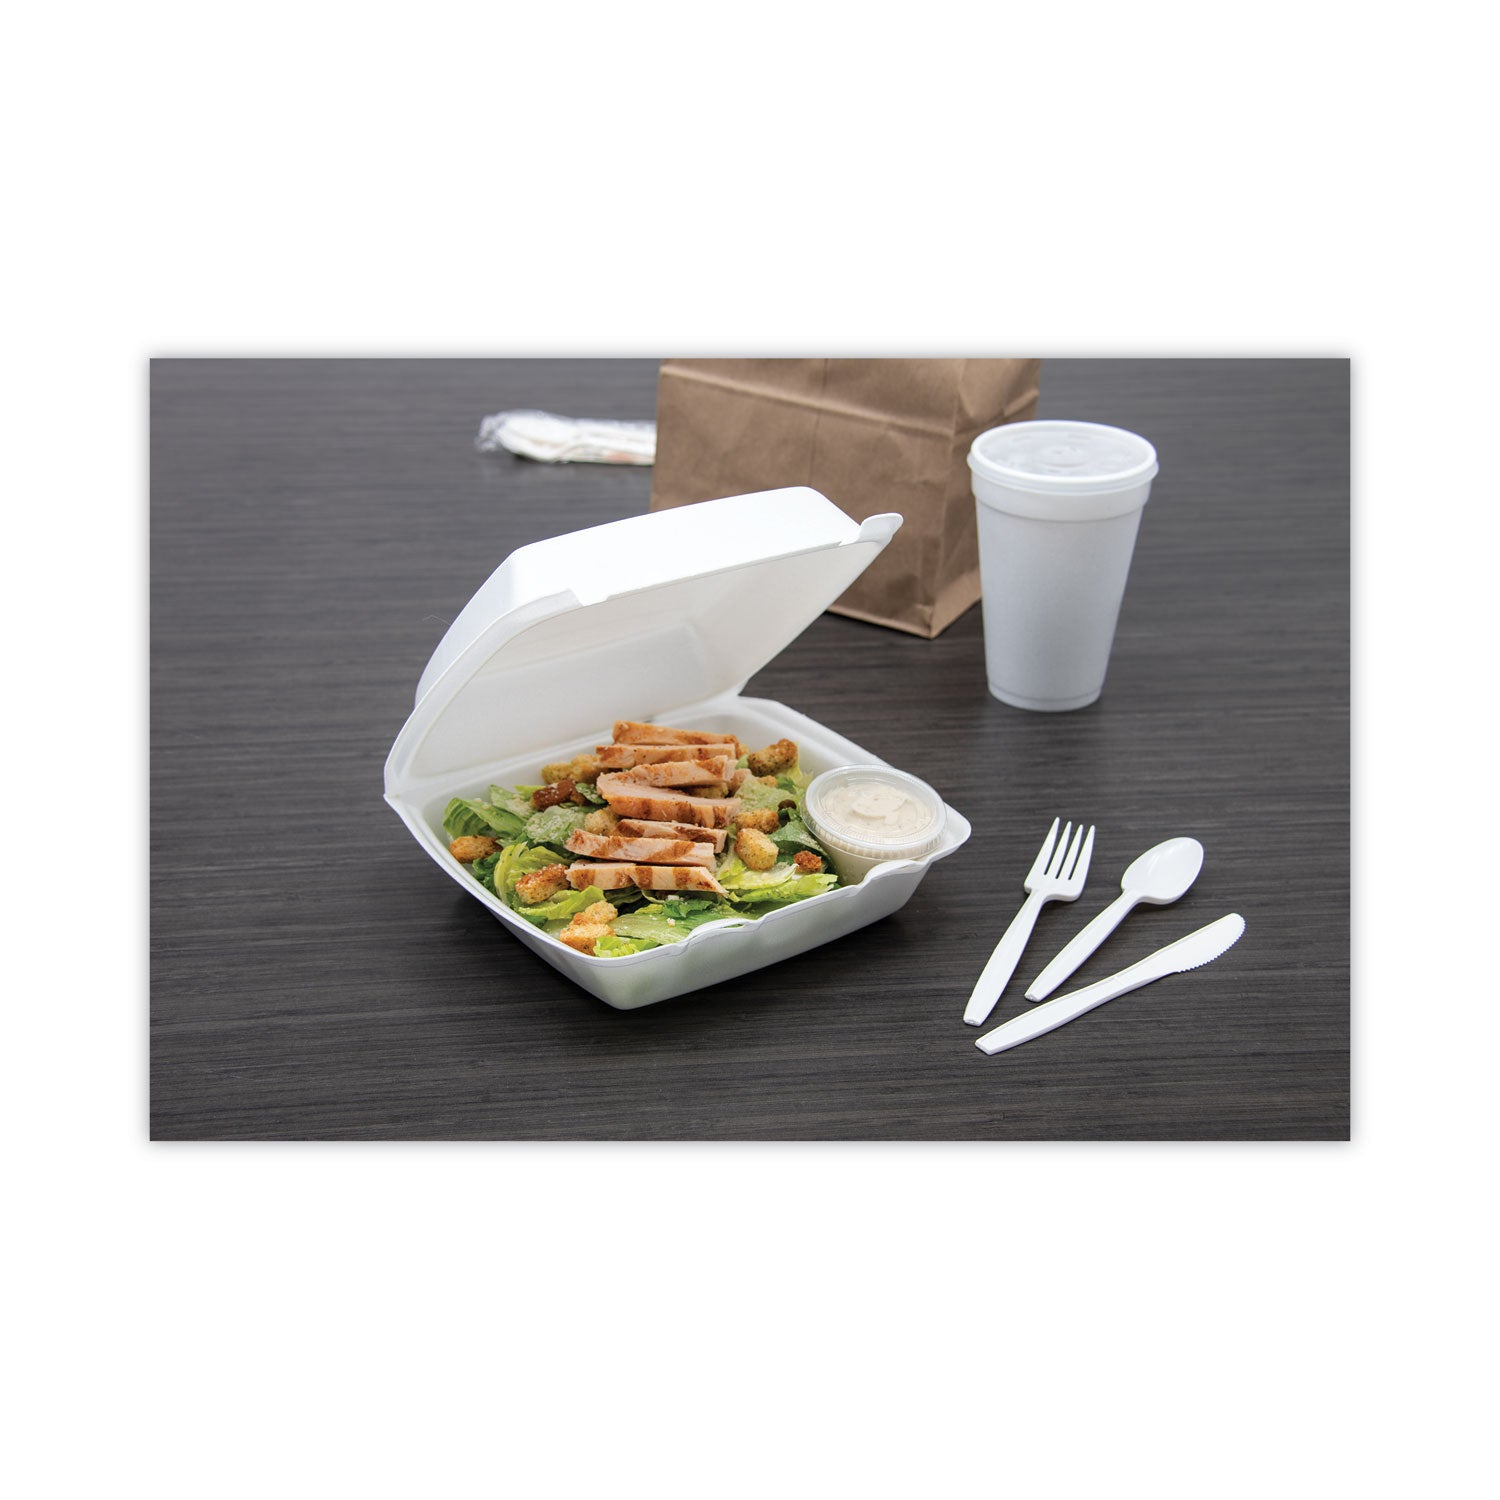 Foam Hinged Lid Containers, 1-Compartment, 8.38" x 7.78" x 3.25", White, 200/Carton - 